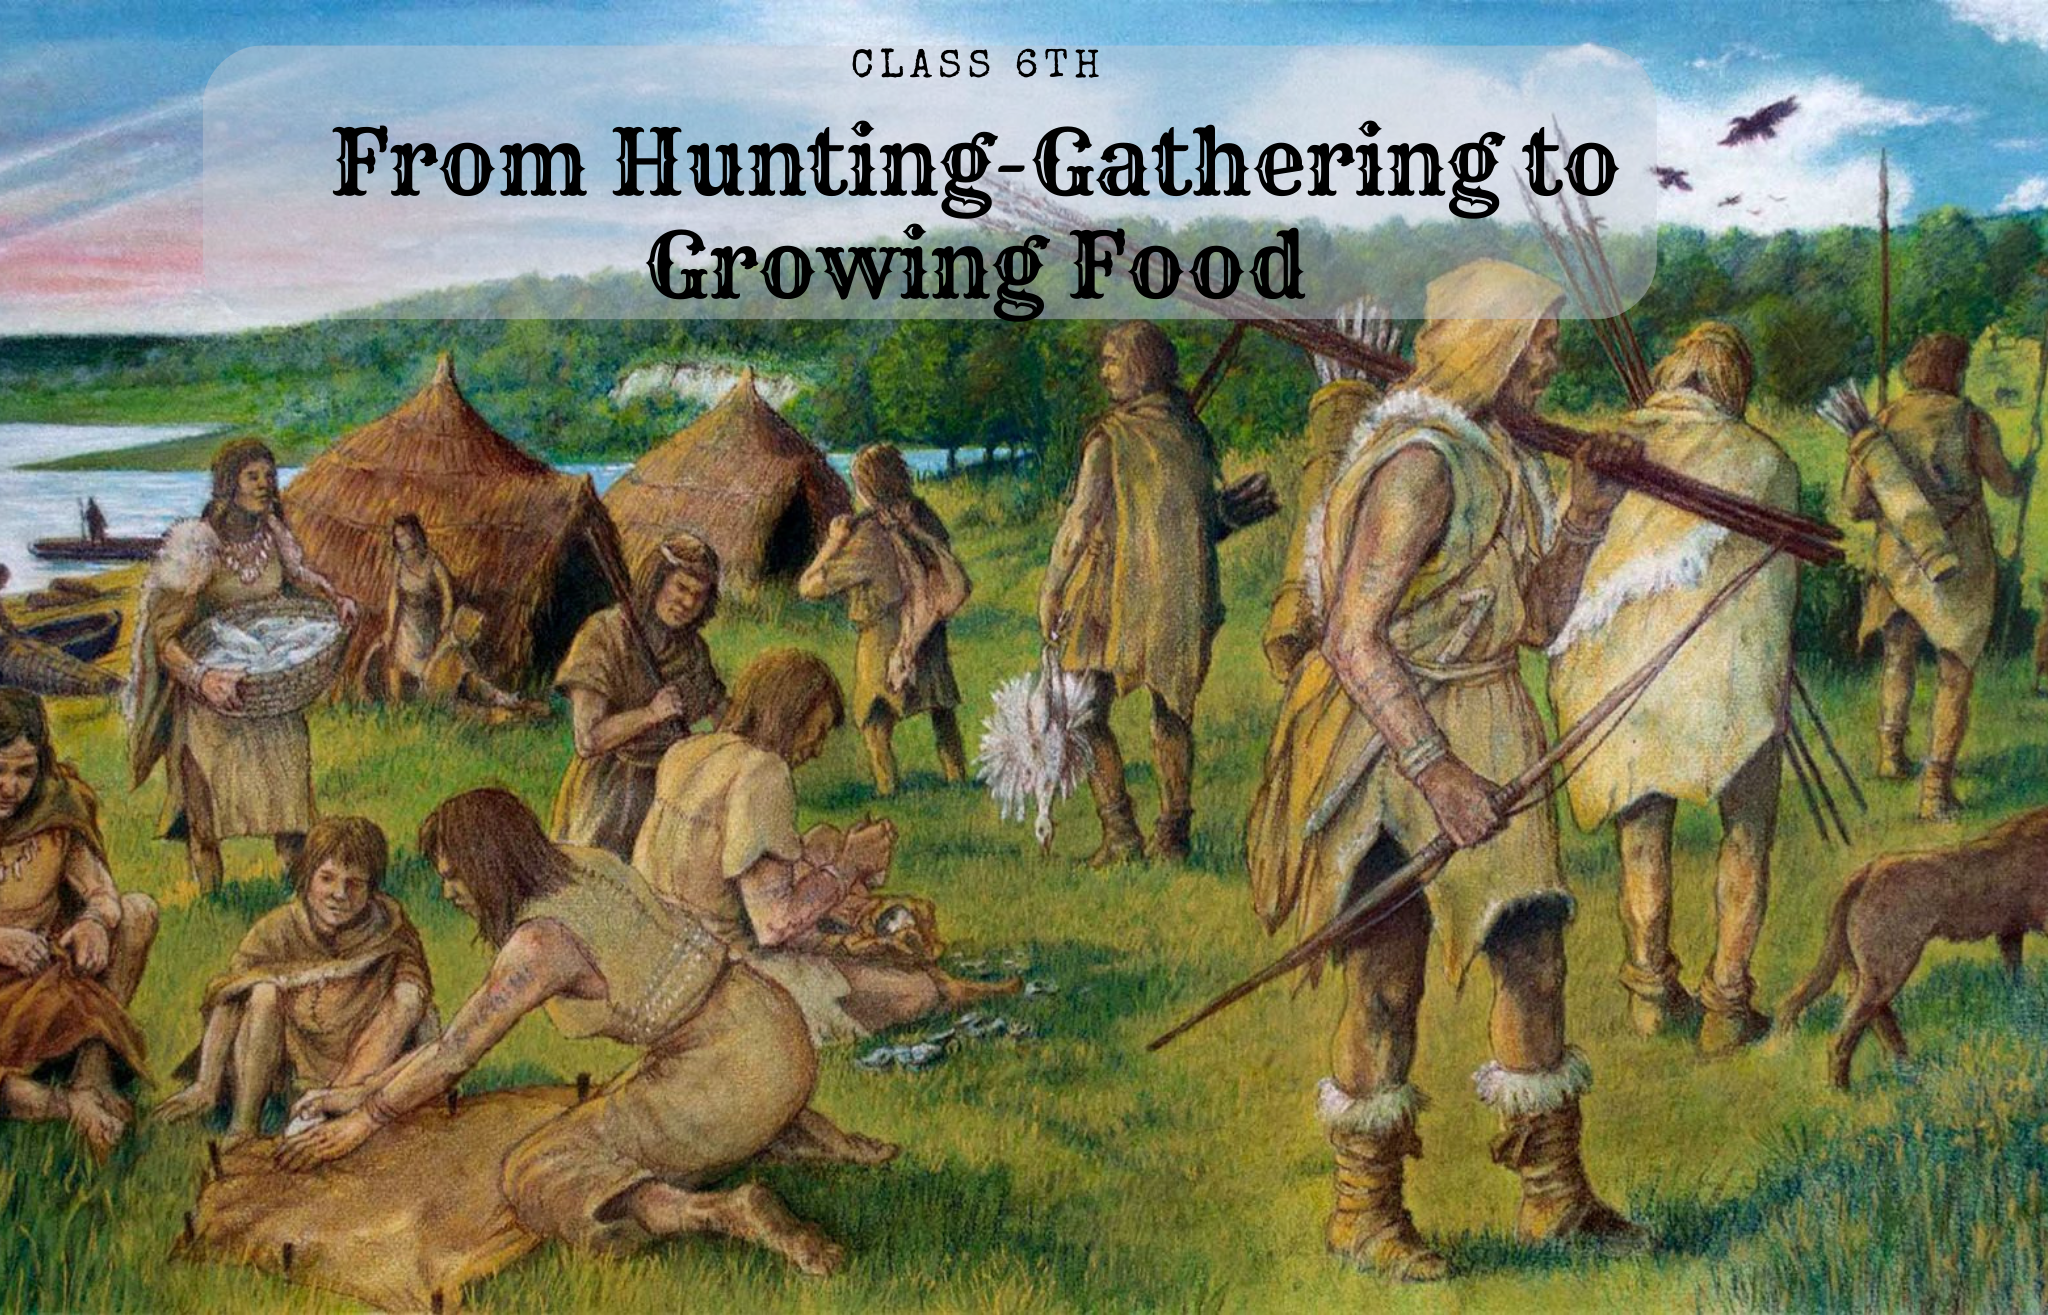 Solutions for Class 6 History Chapter 2 – “From Hunting-Gathering to Growing Food”